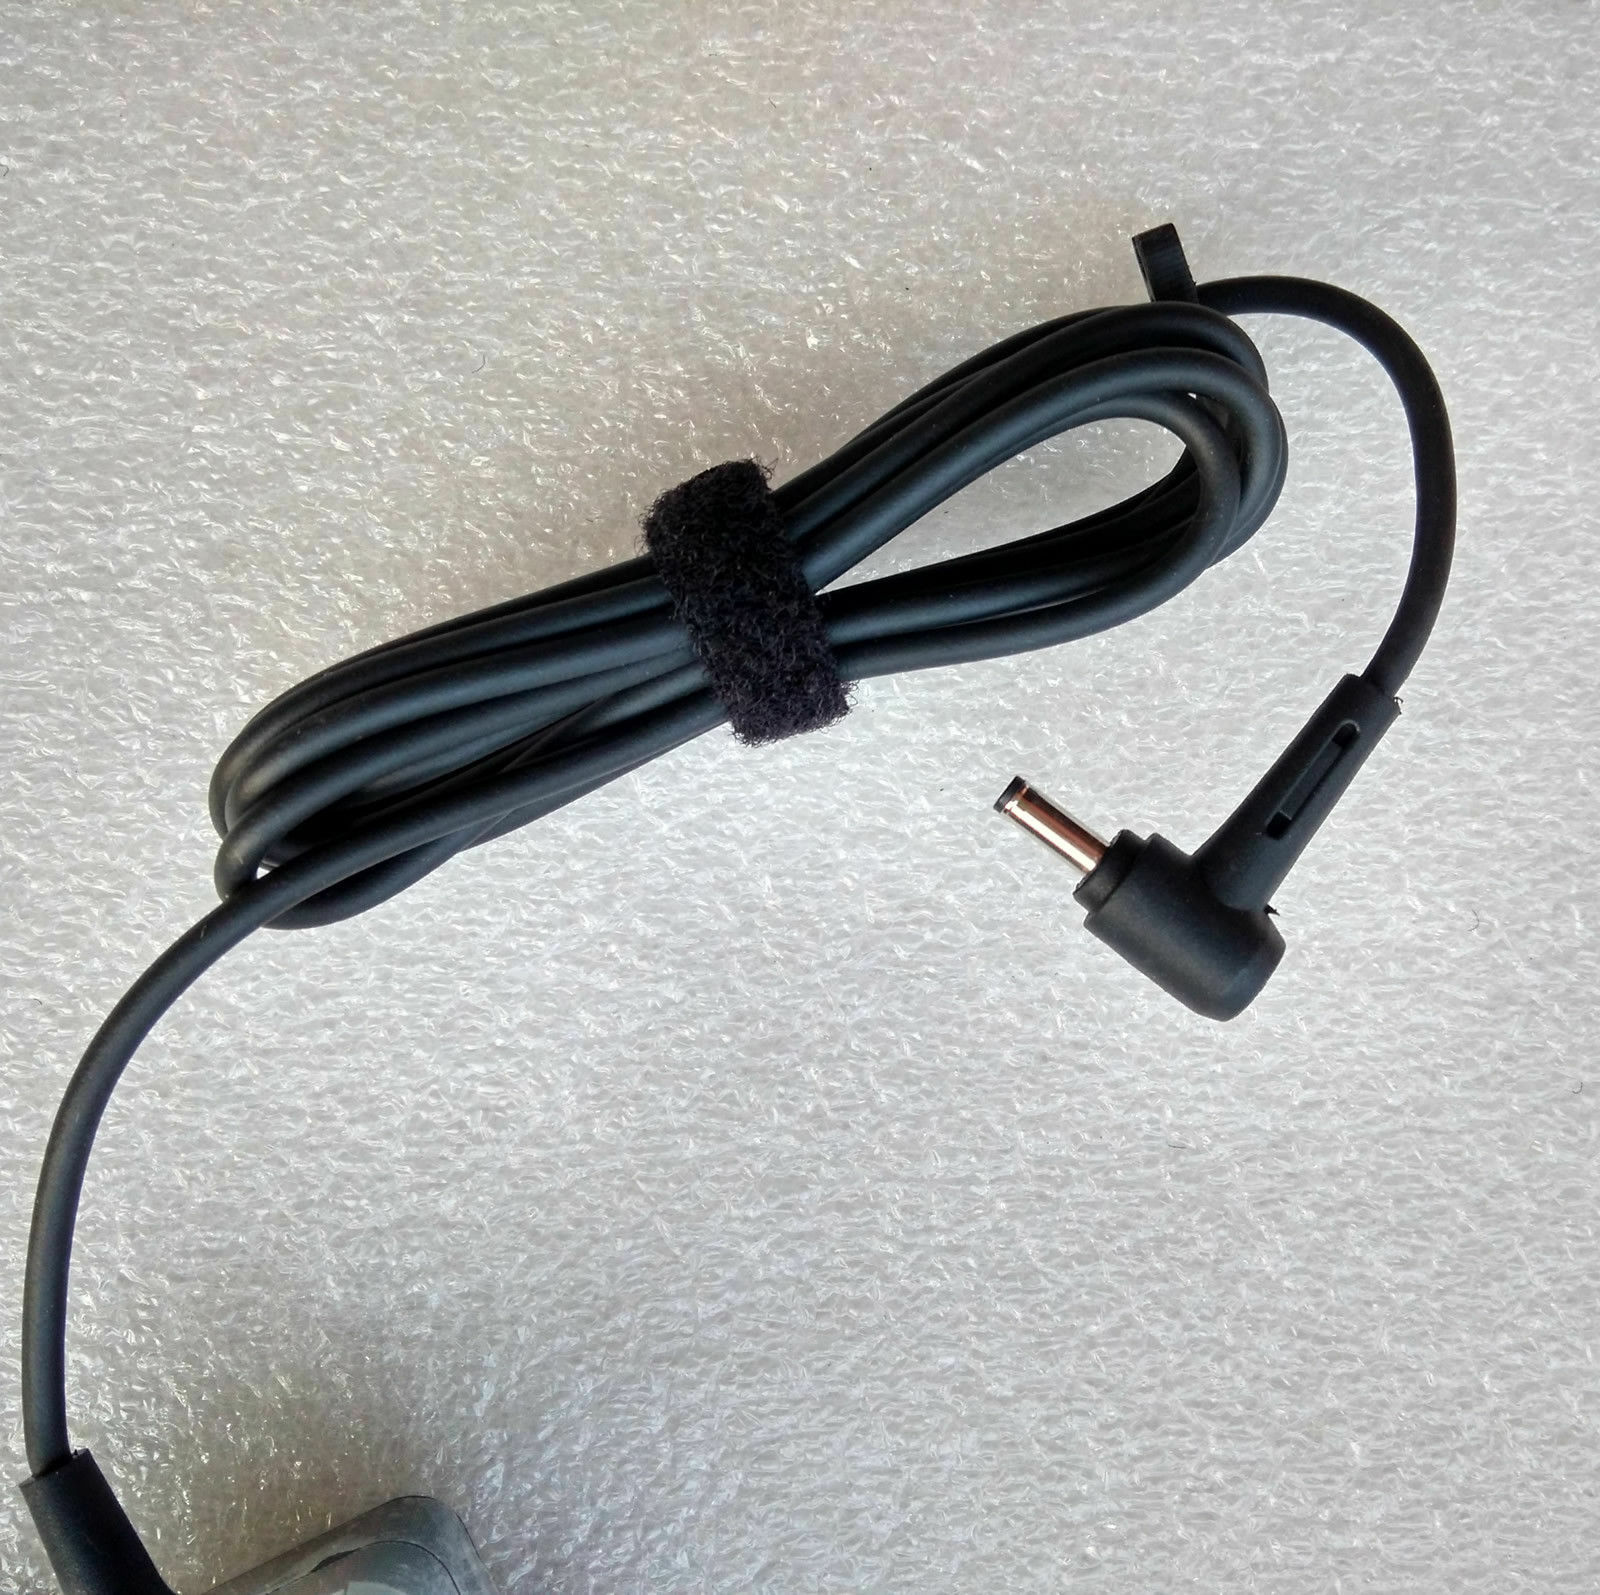 asus t3 chi laptop ac adapter